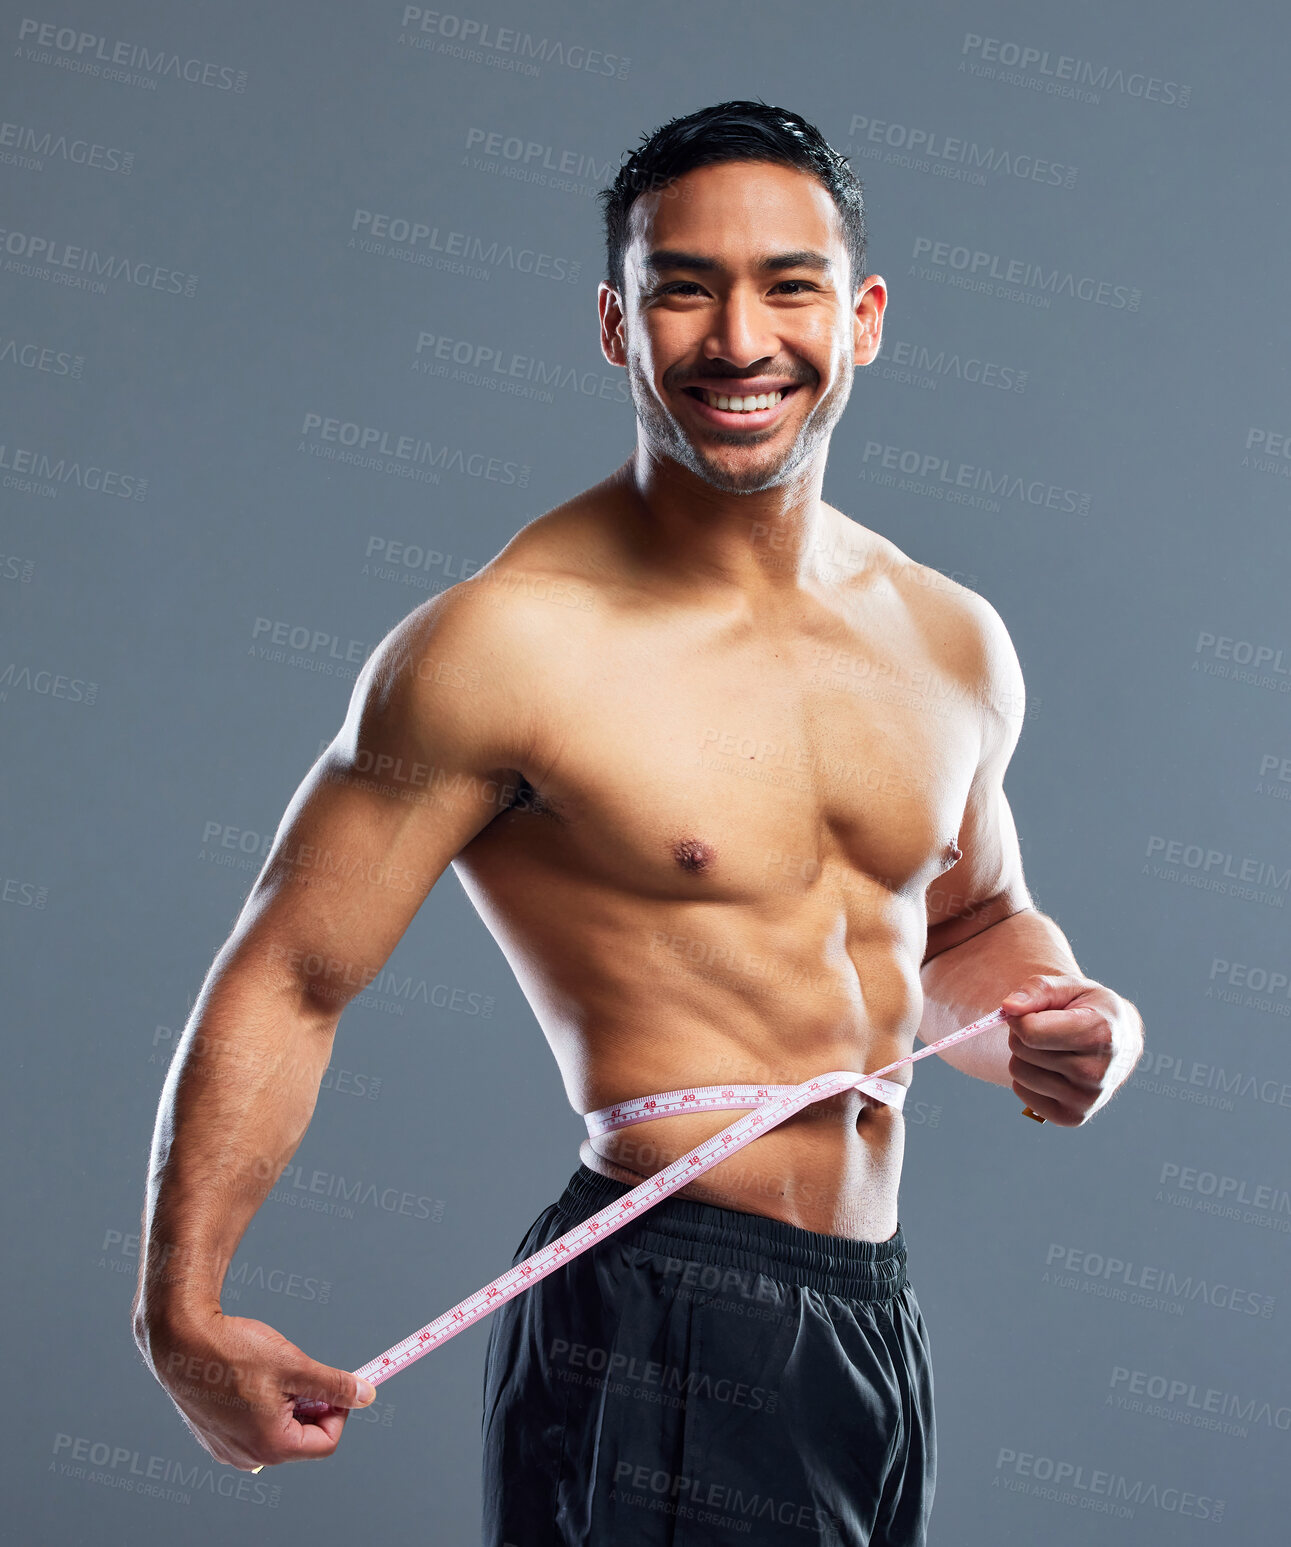 Buy stock photo Studio portrait of a muscular young man measuring his waist against a grey background